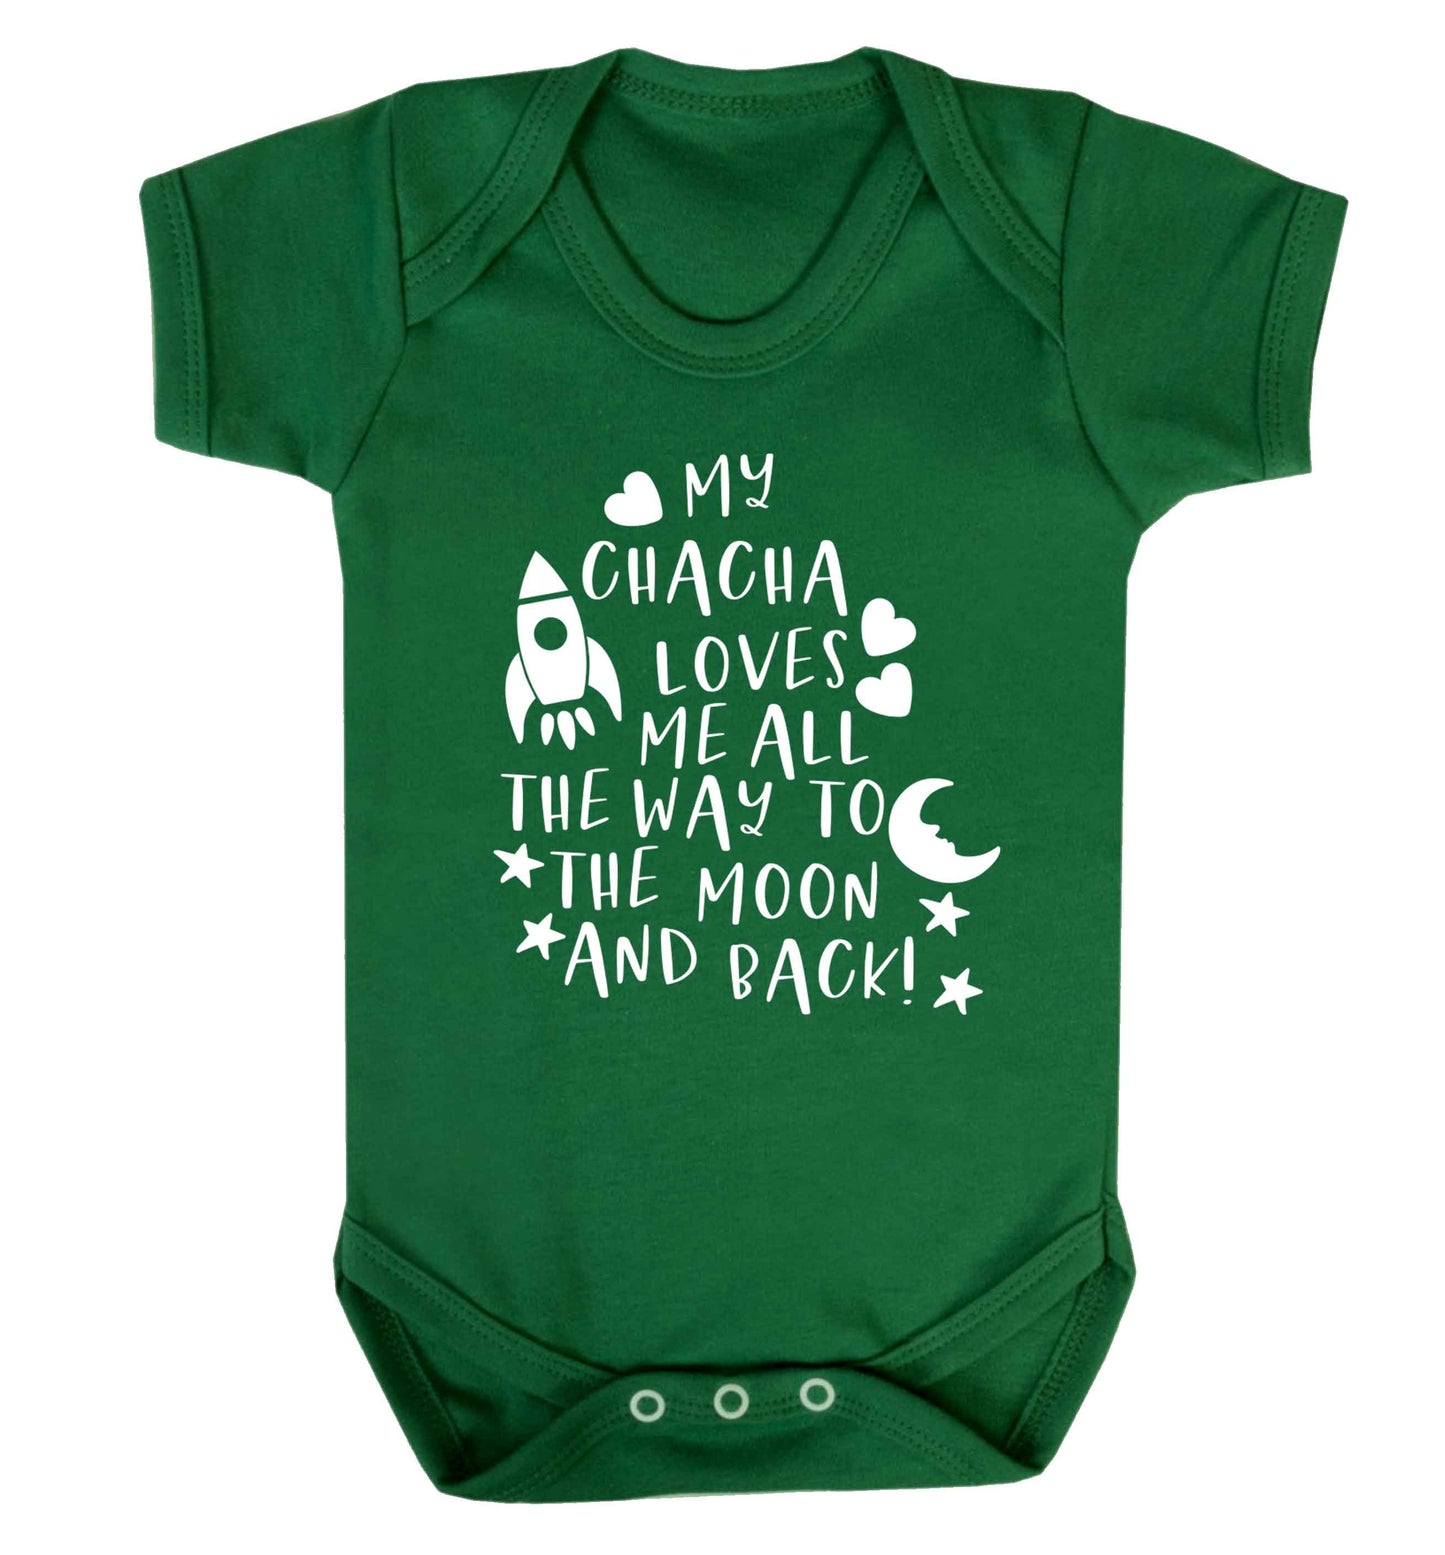 My chacha loves me all the way to the moon and back Baby Vest green 18-24 months